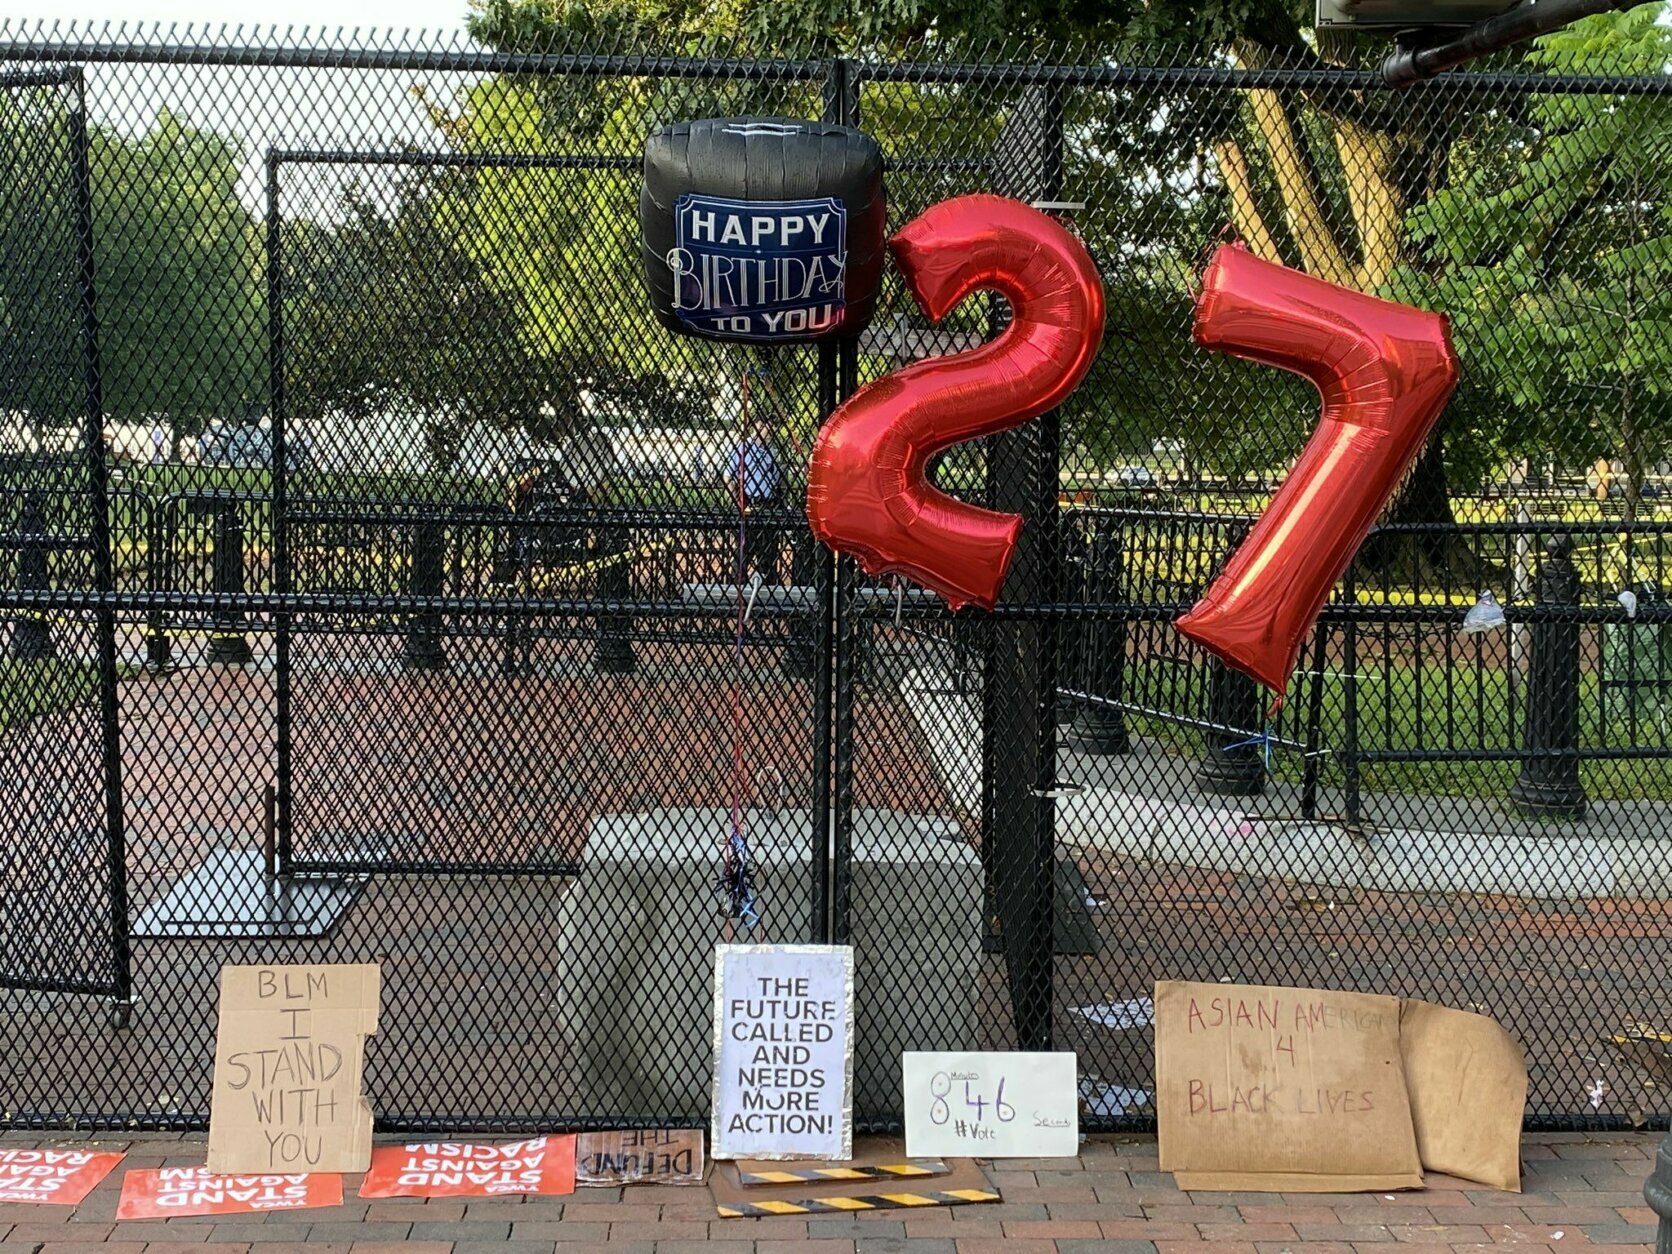 <p>The scene outside of Lafayette Square park at Black Lives Matter Plaza in D.C. ahead of planned protests on Saturday.</p>
